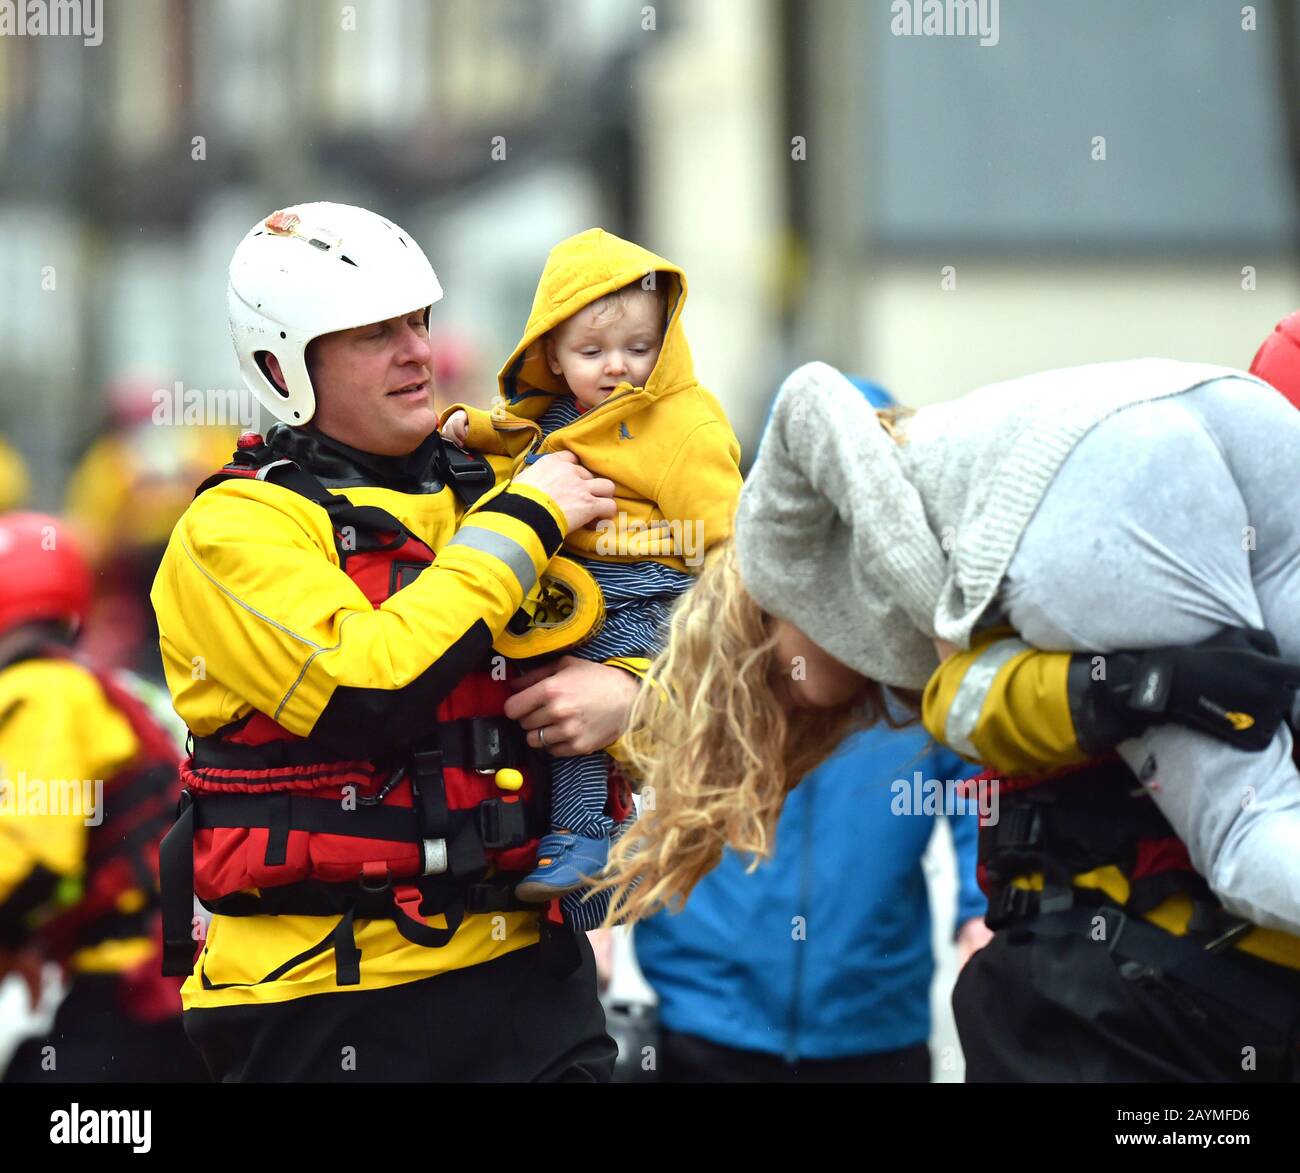 One-year-old Blake and his mum, Terri O'Donnel, are carried to safety as rescue operations continue, after flooding in Nantgarw, Wales, as Storm Dennis hit the UK. Stock Photo